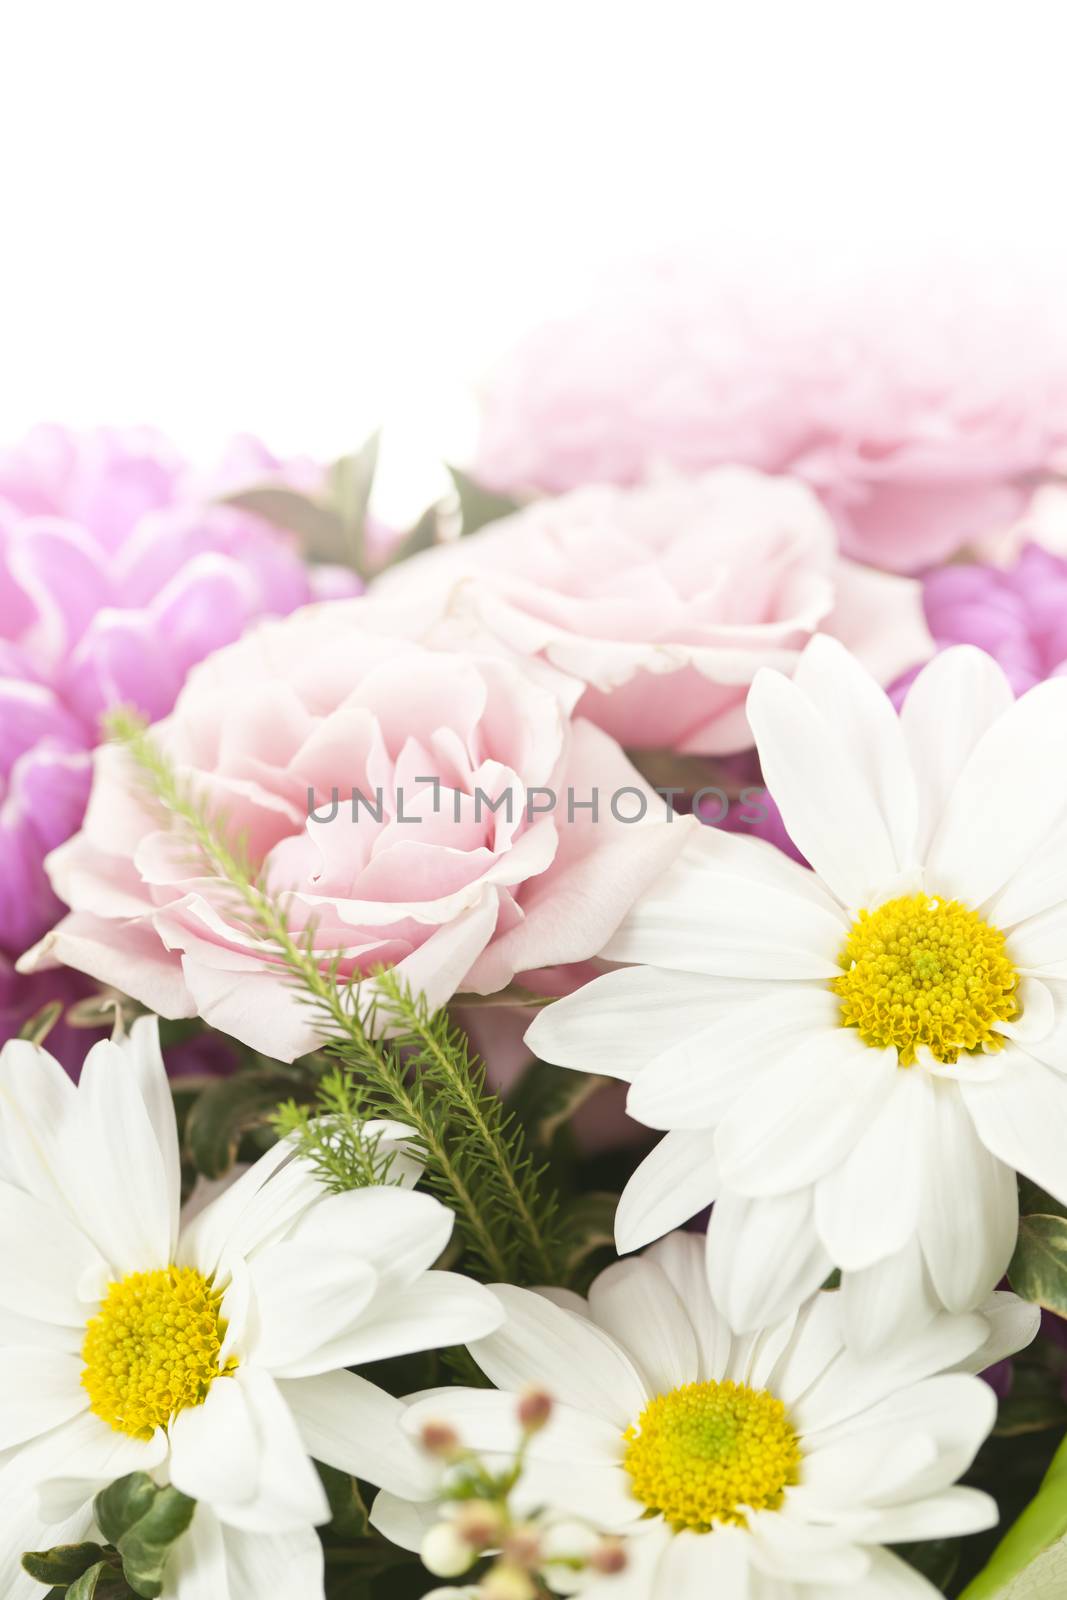 Fading background of flower arrangement with pink and white flowers